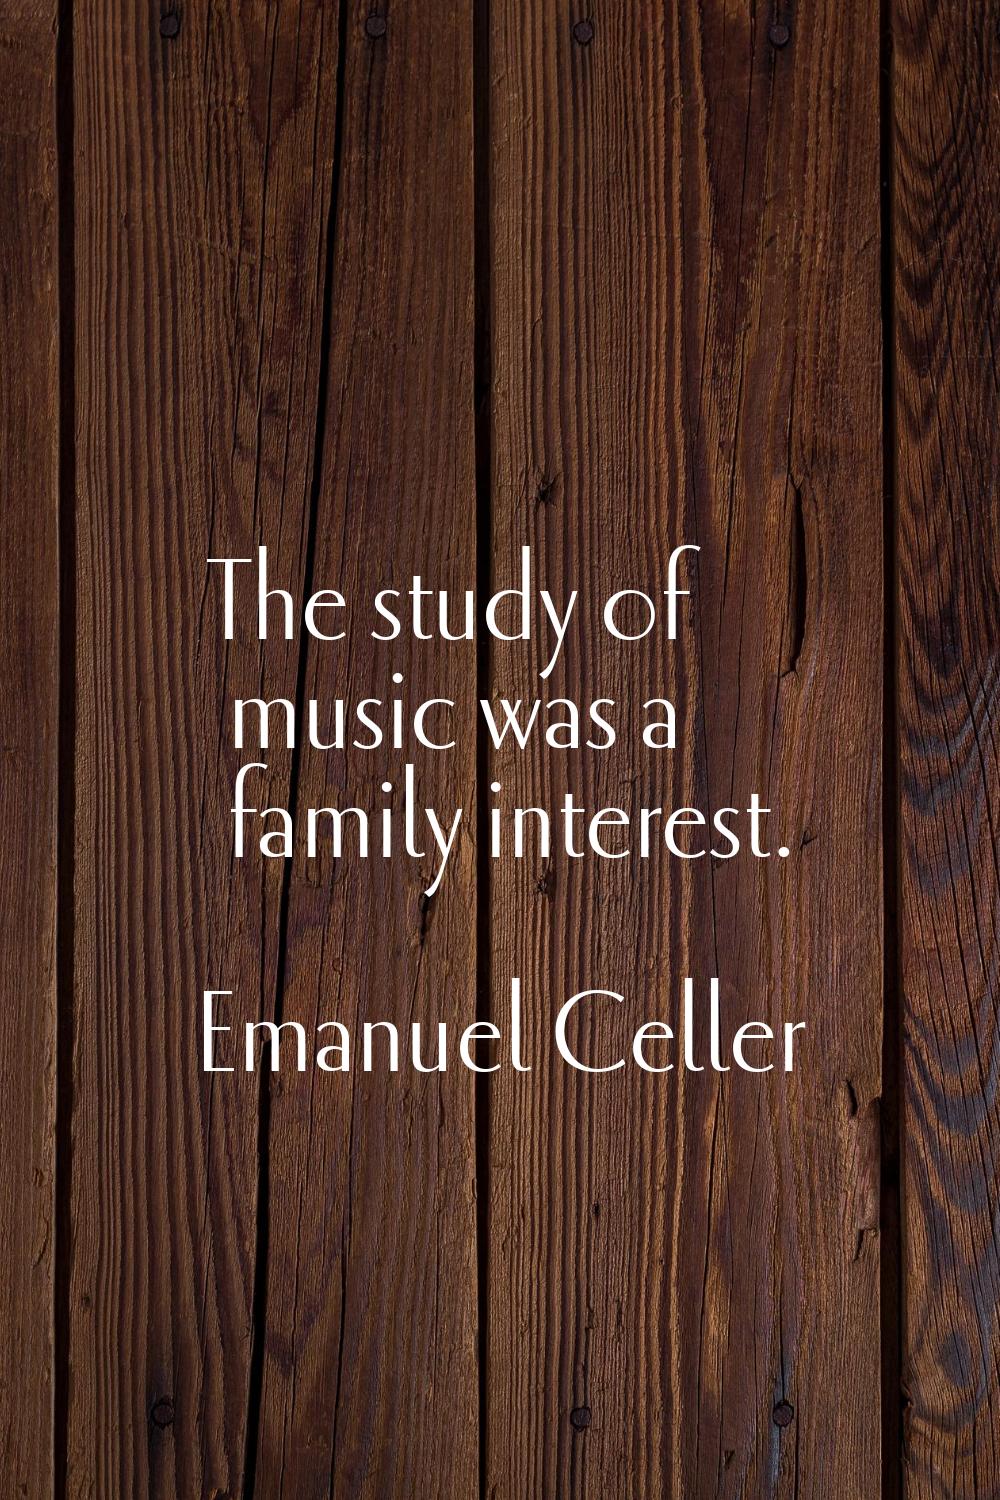 The study of music was a family interest.